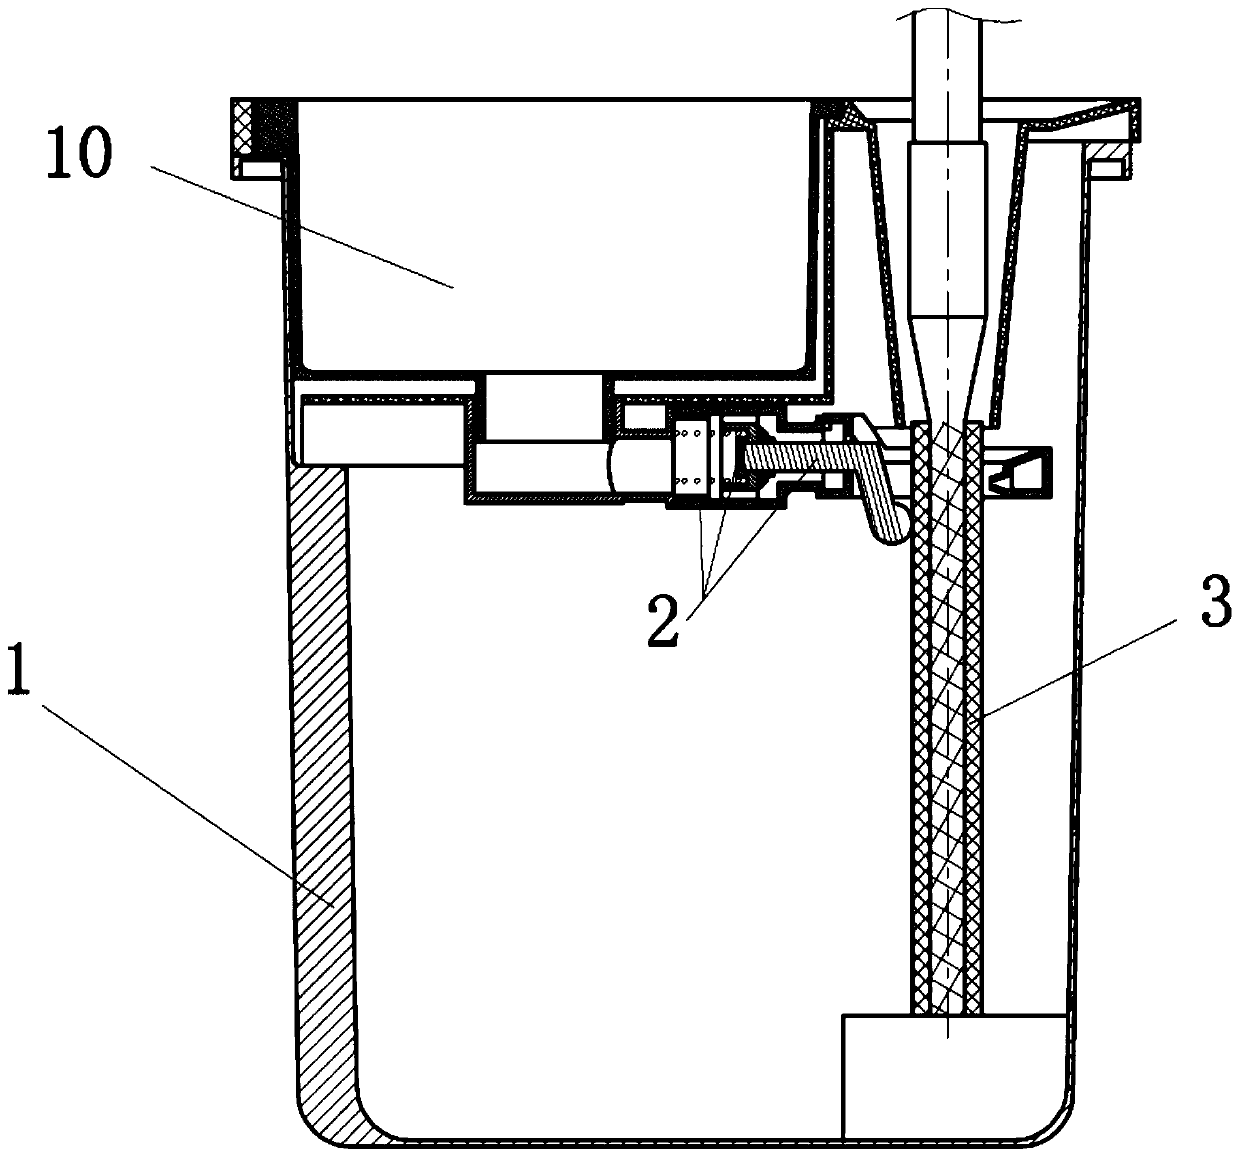 Device for washing mop by running water